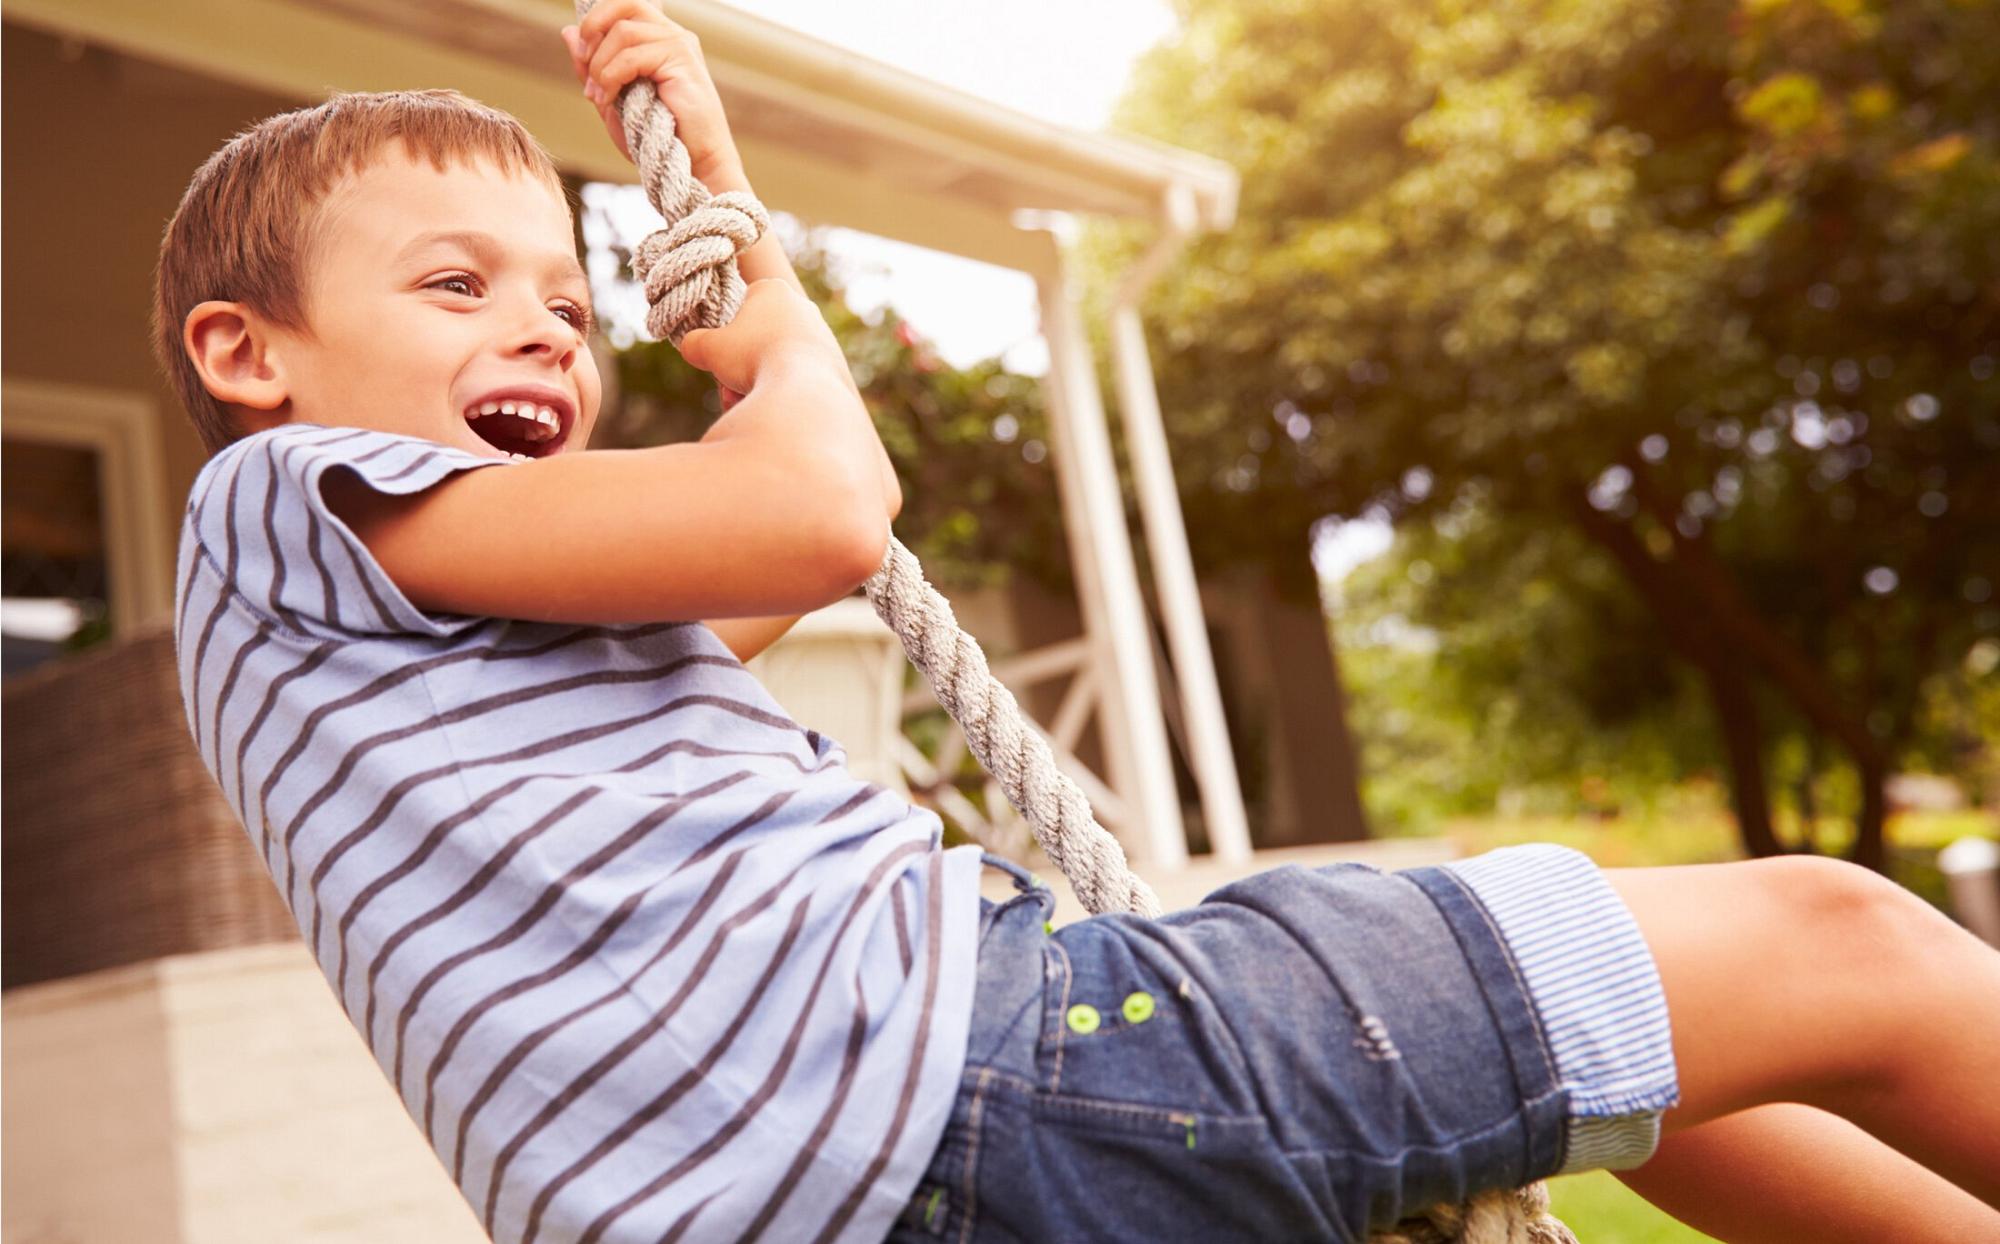 Child swinging on rope and smiling